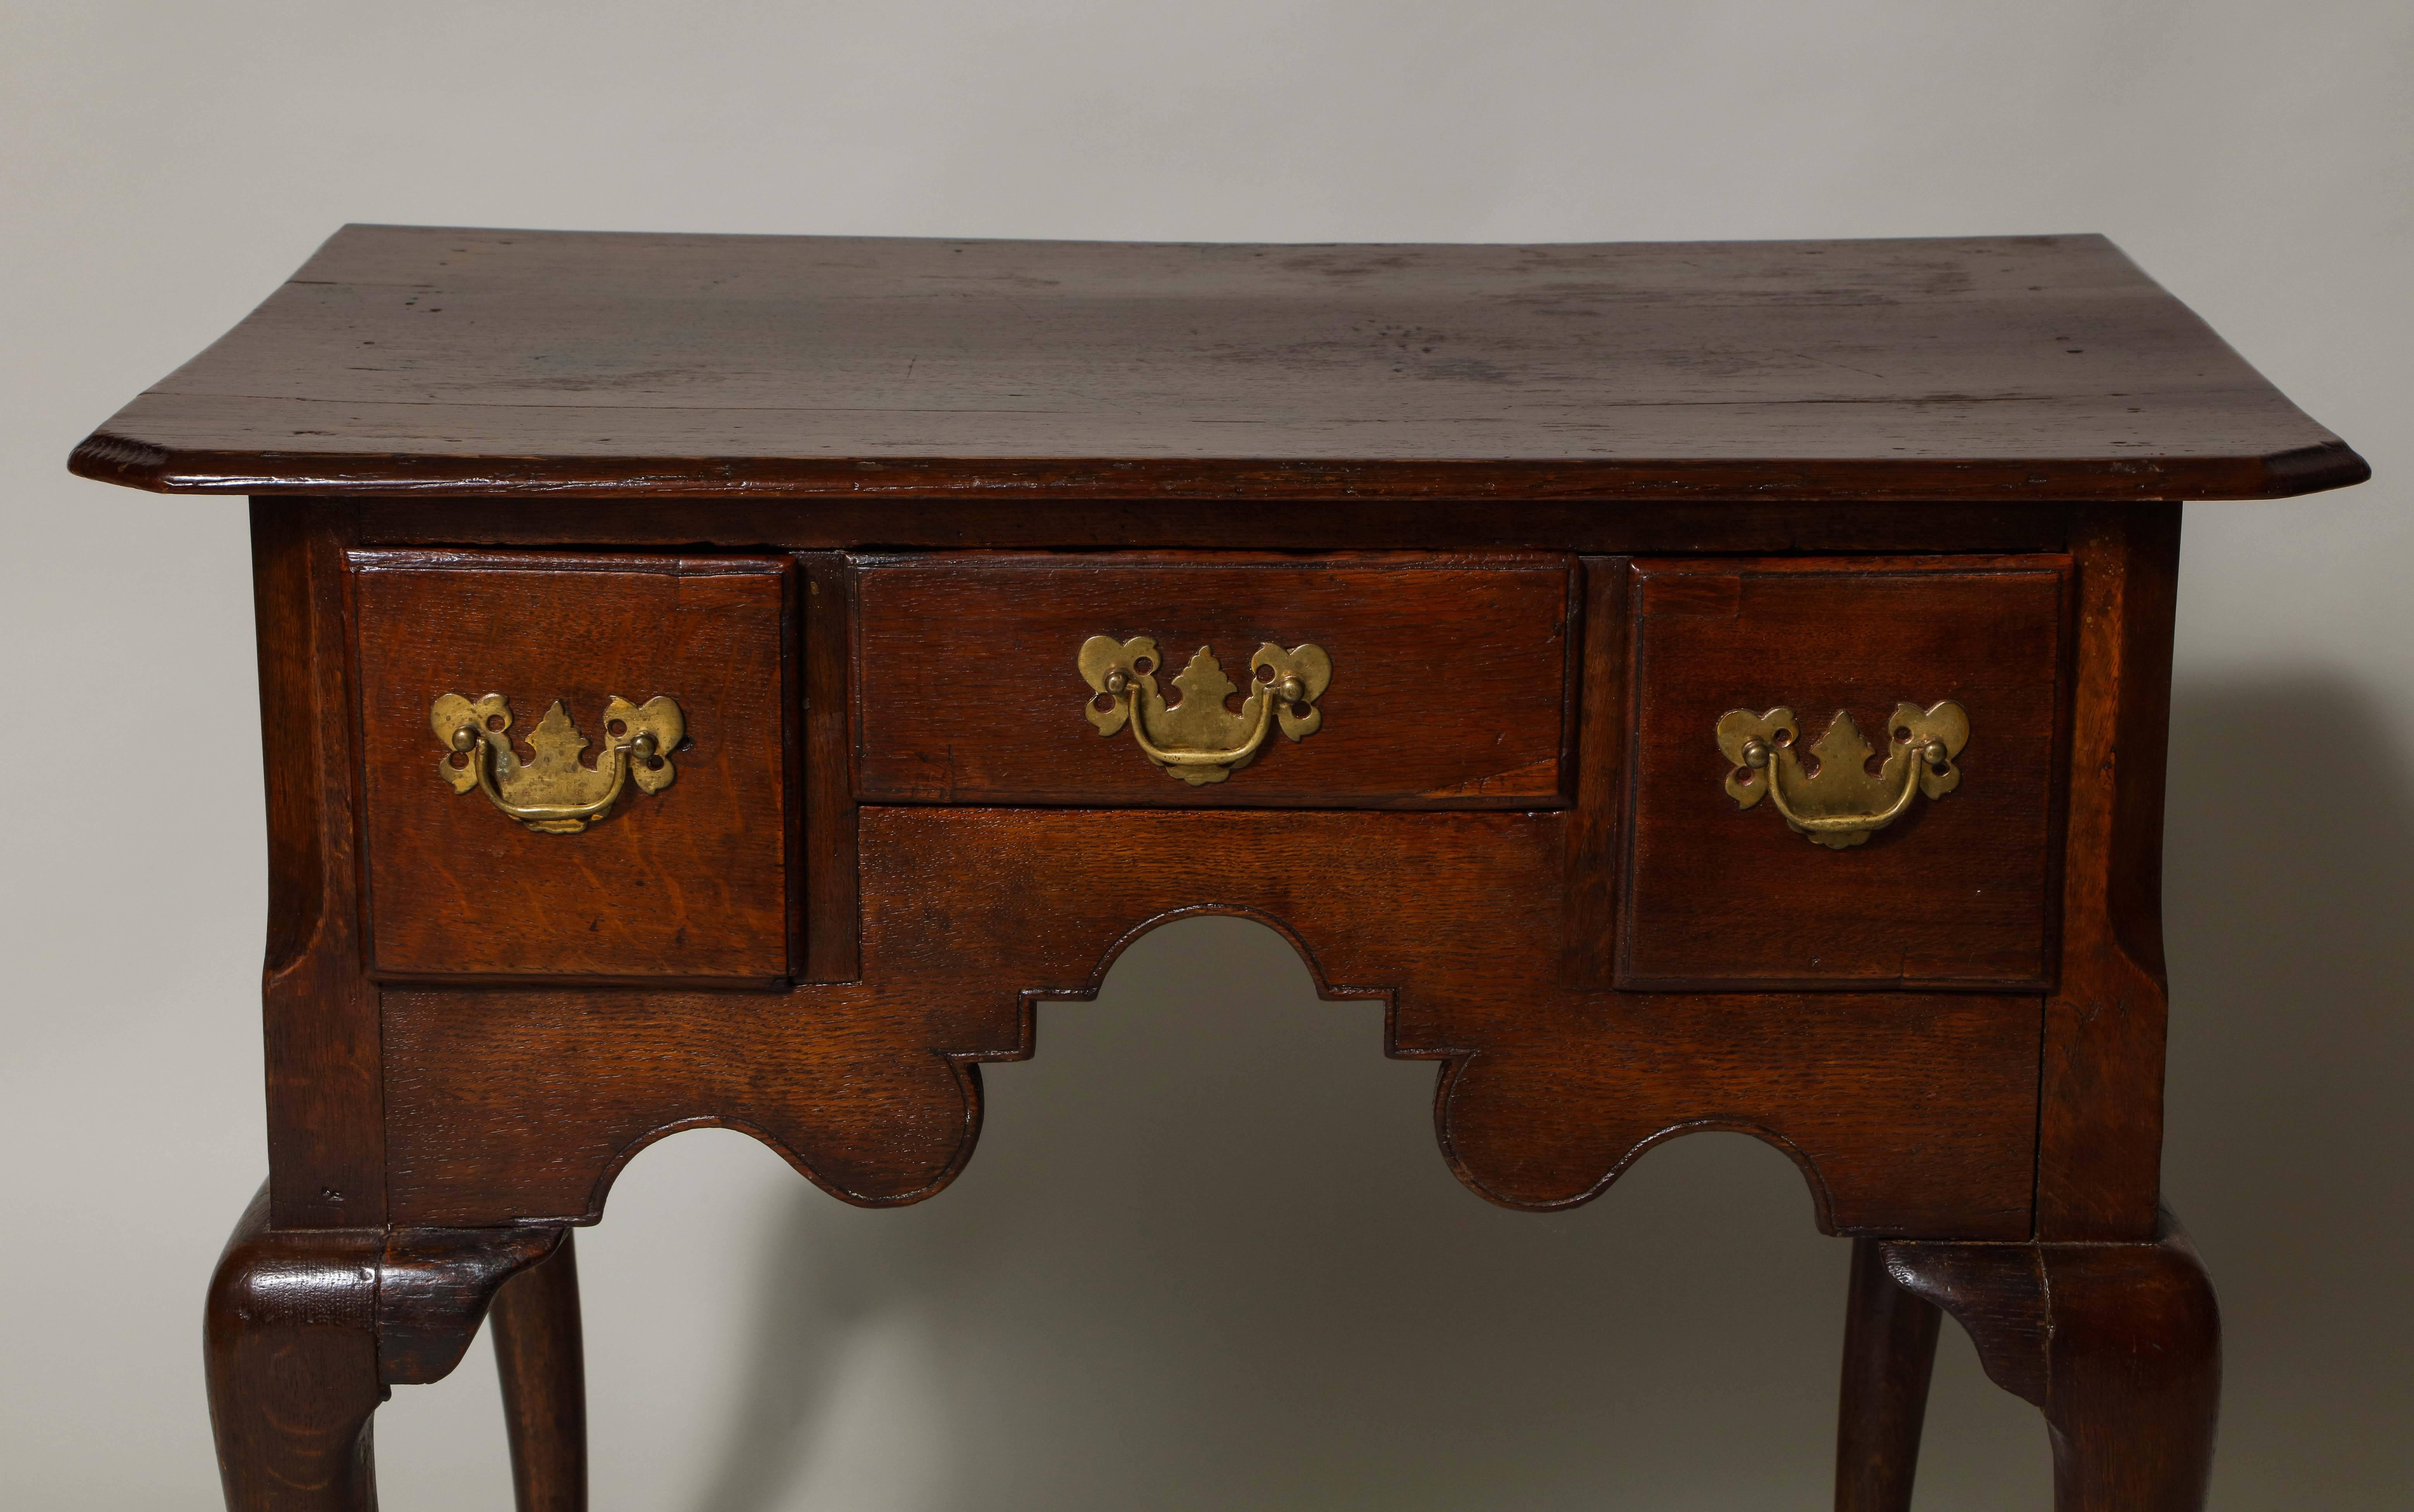 Good George II oak lowboy/dressing table, the molded with canted corners over three drawers over richly scalloped and beaded apron, the four cabriole legs deeply chamfered at the carcass and with shaped brackets, the whole with pleasing, mellow